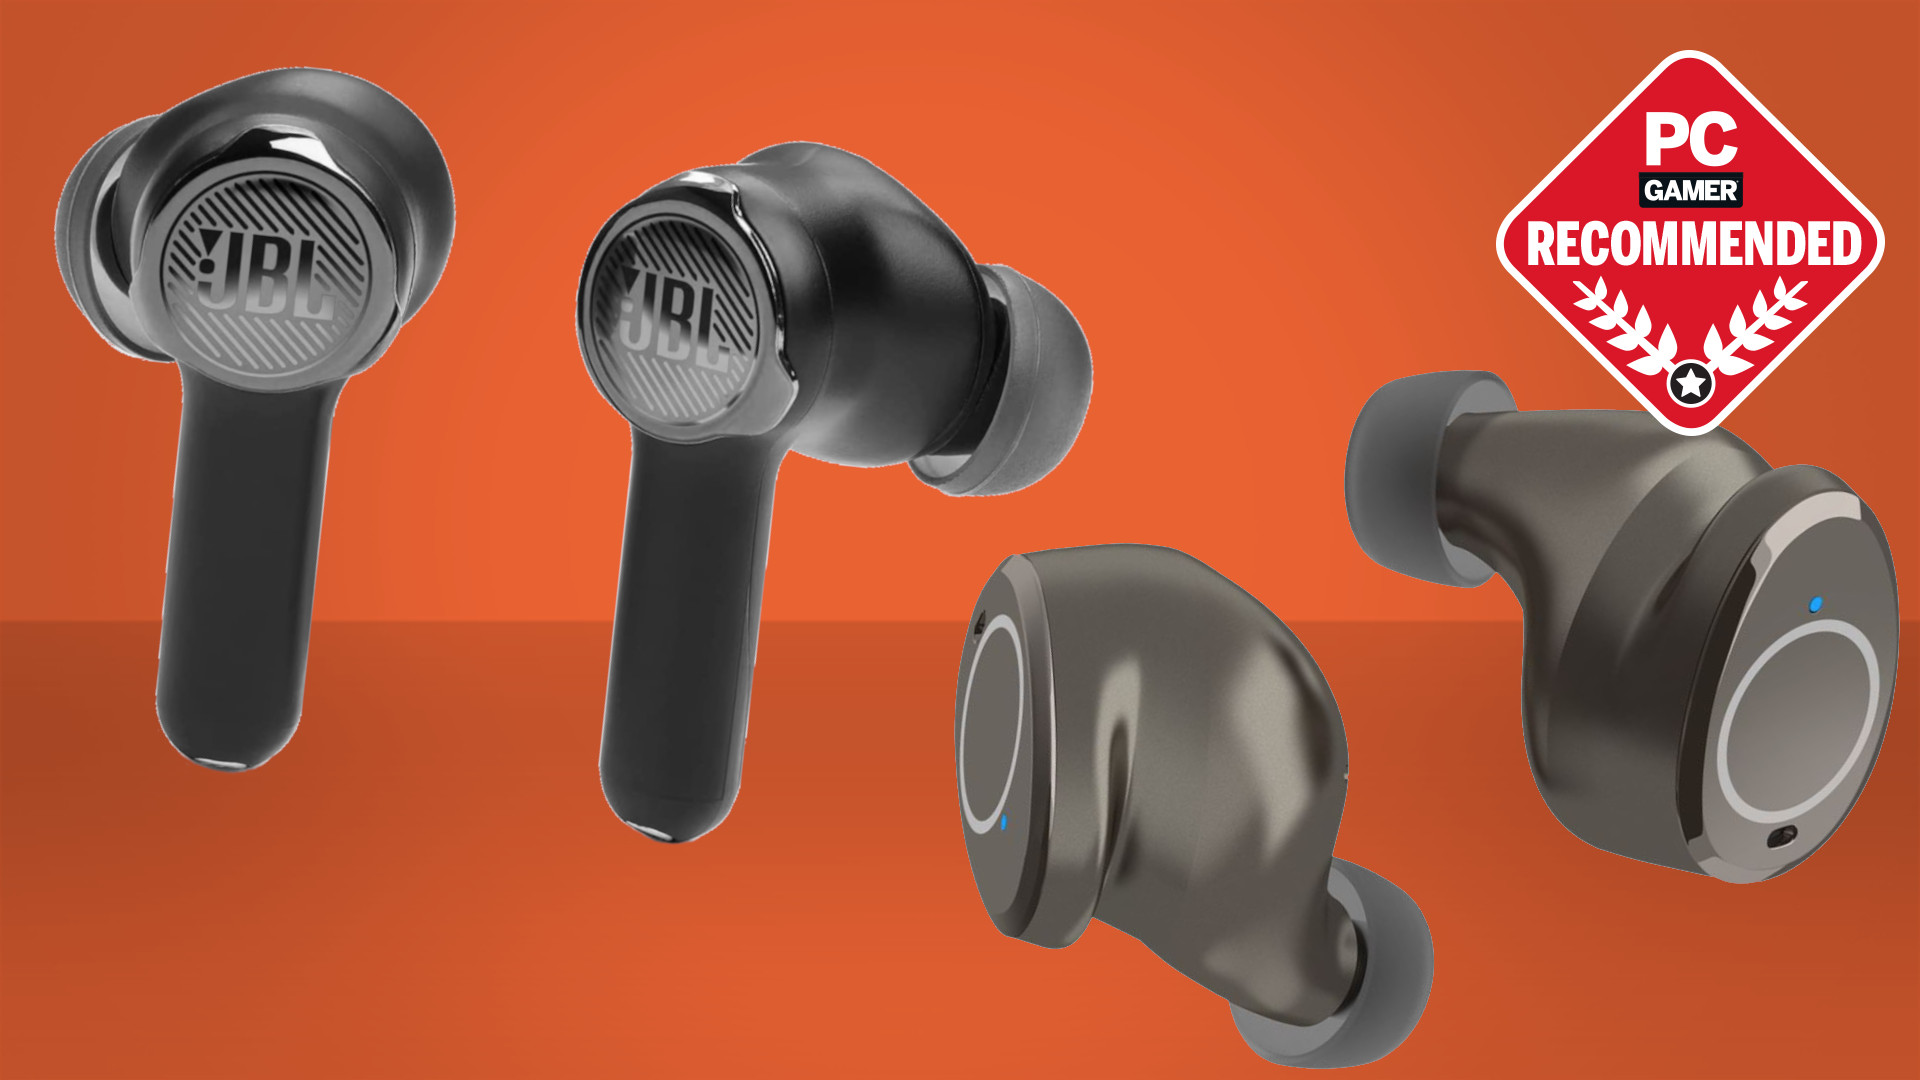 JBL and Creative earbuds on an orange background